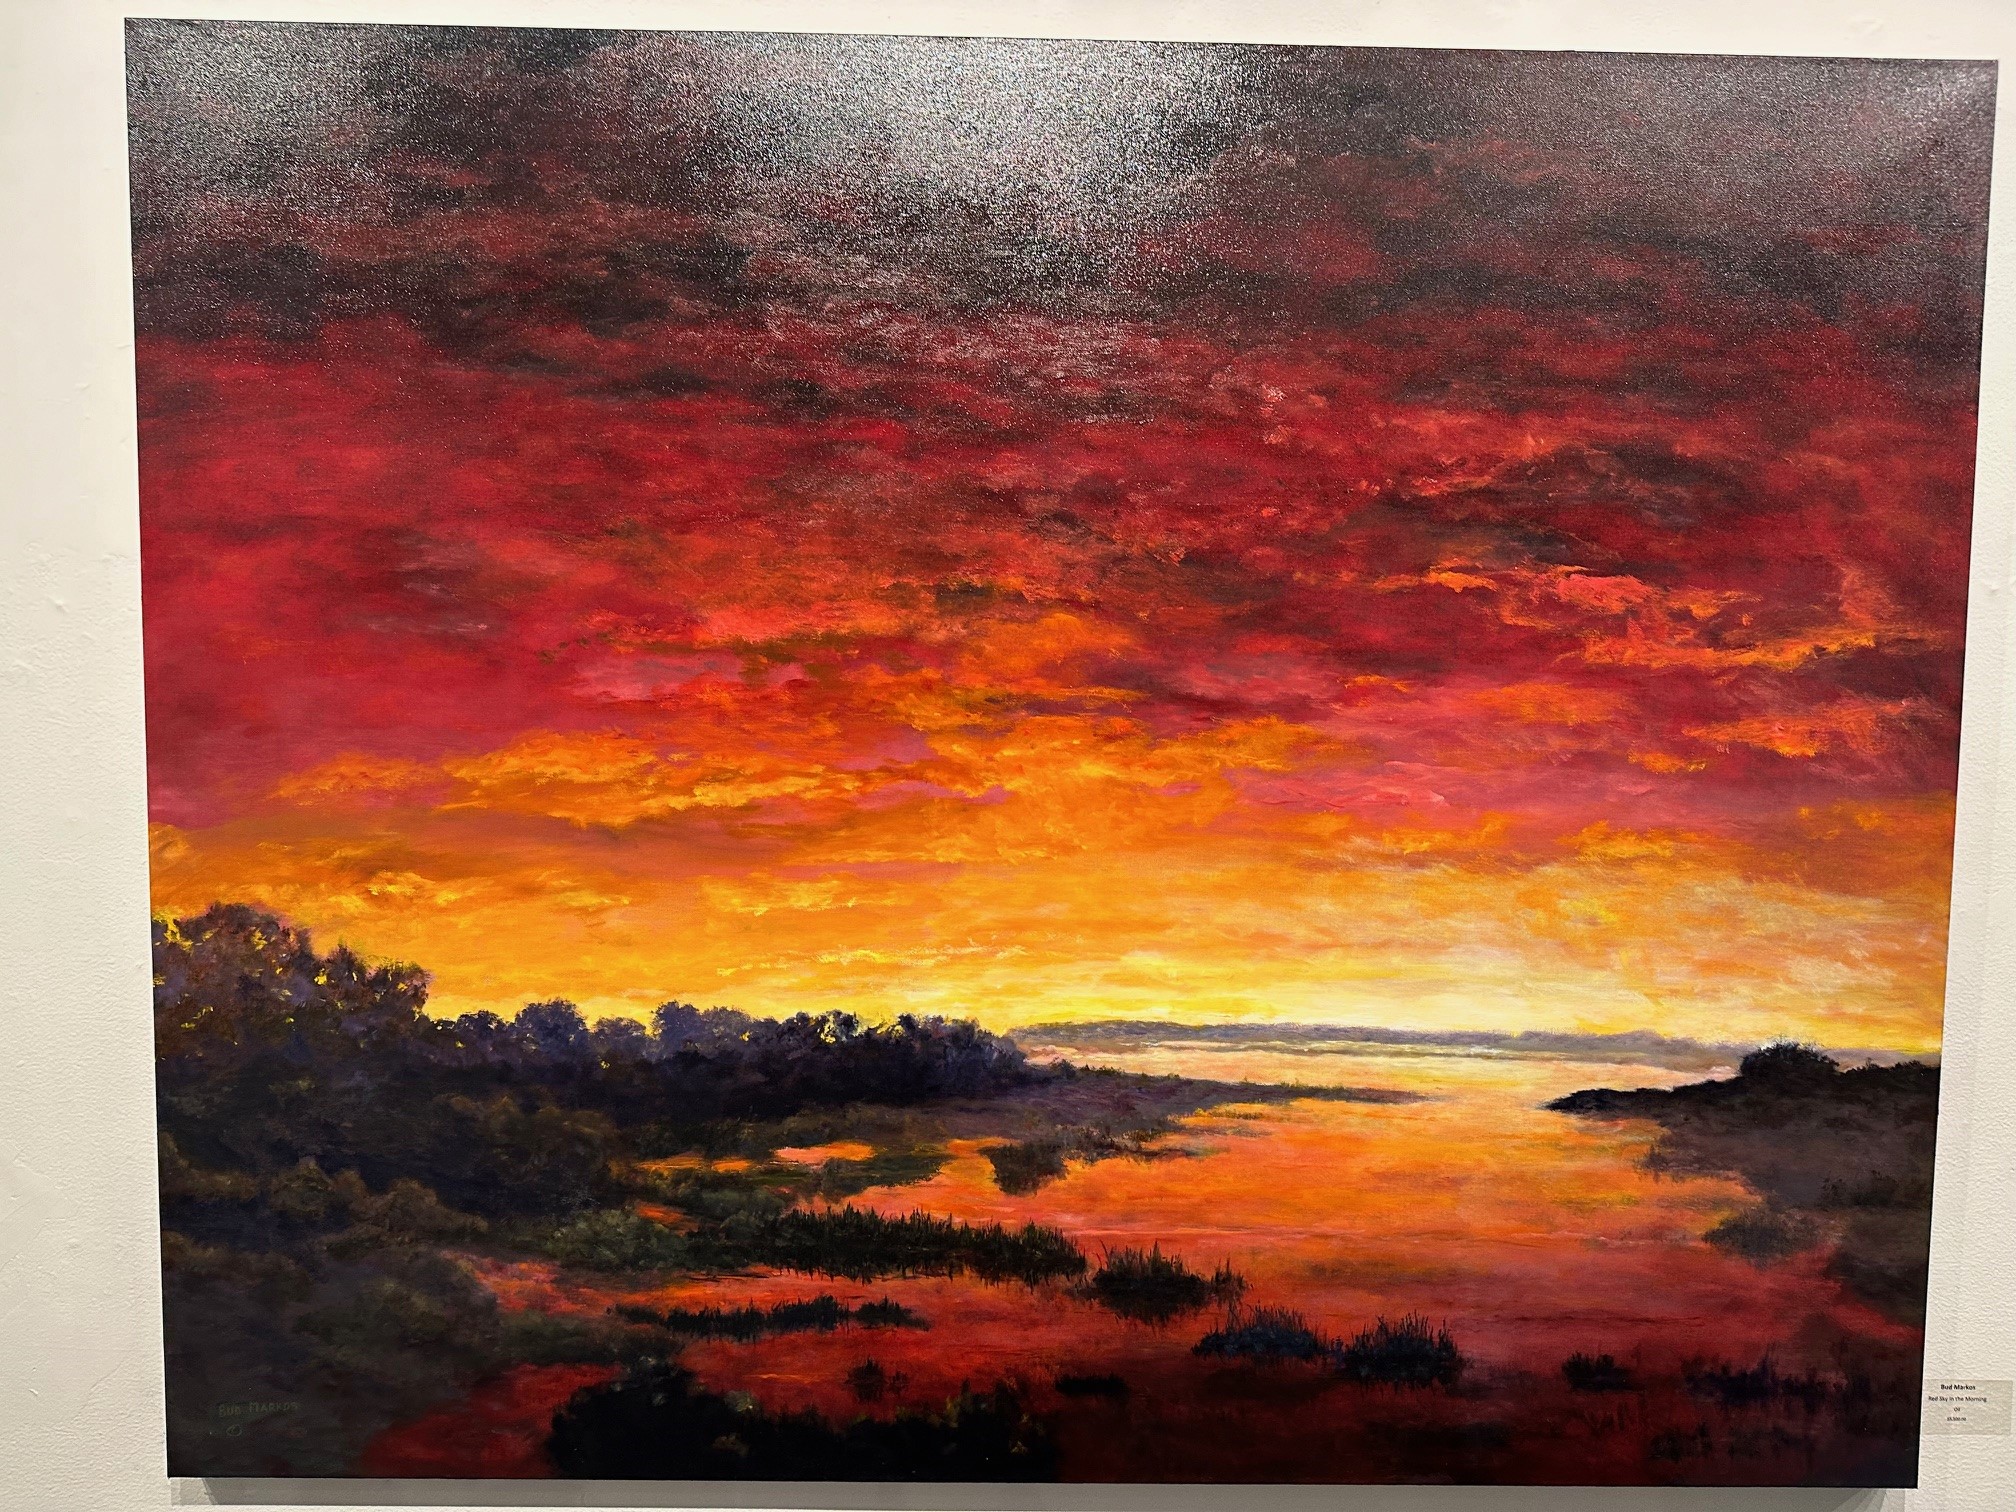 "Red Sky in the Morning" by Bud Markos